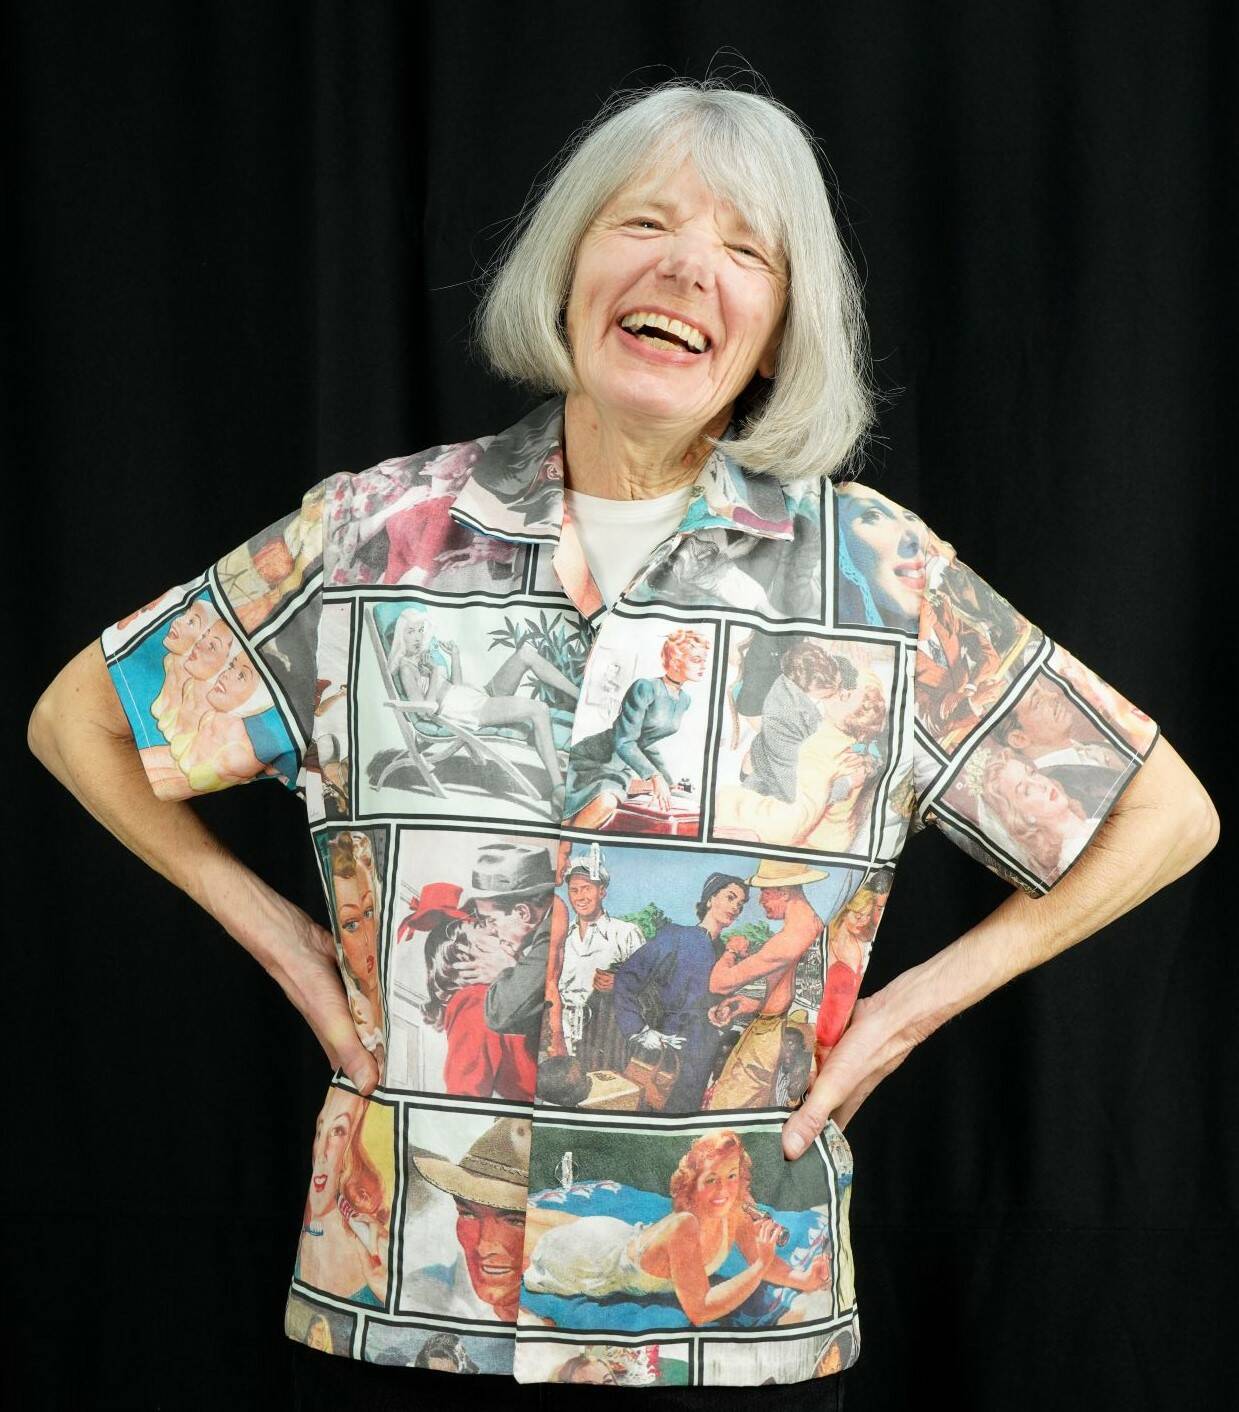 Photo courtesy of Peninsula Fiber Artists
“Faces of the 40s” is a shirt created by Sequim’s Linda Carlson using digitally-printed fabric she designed with scans of illustrations from 1940s issues of the Saturday Evening Post, Colliers and other magazines.